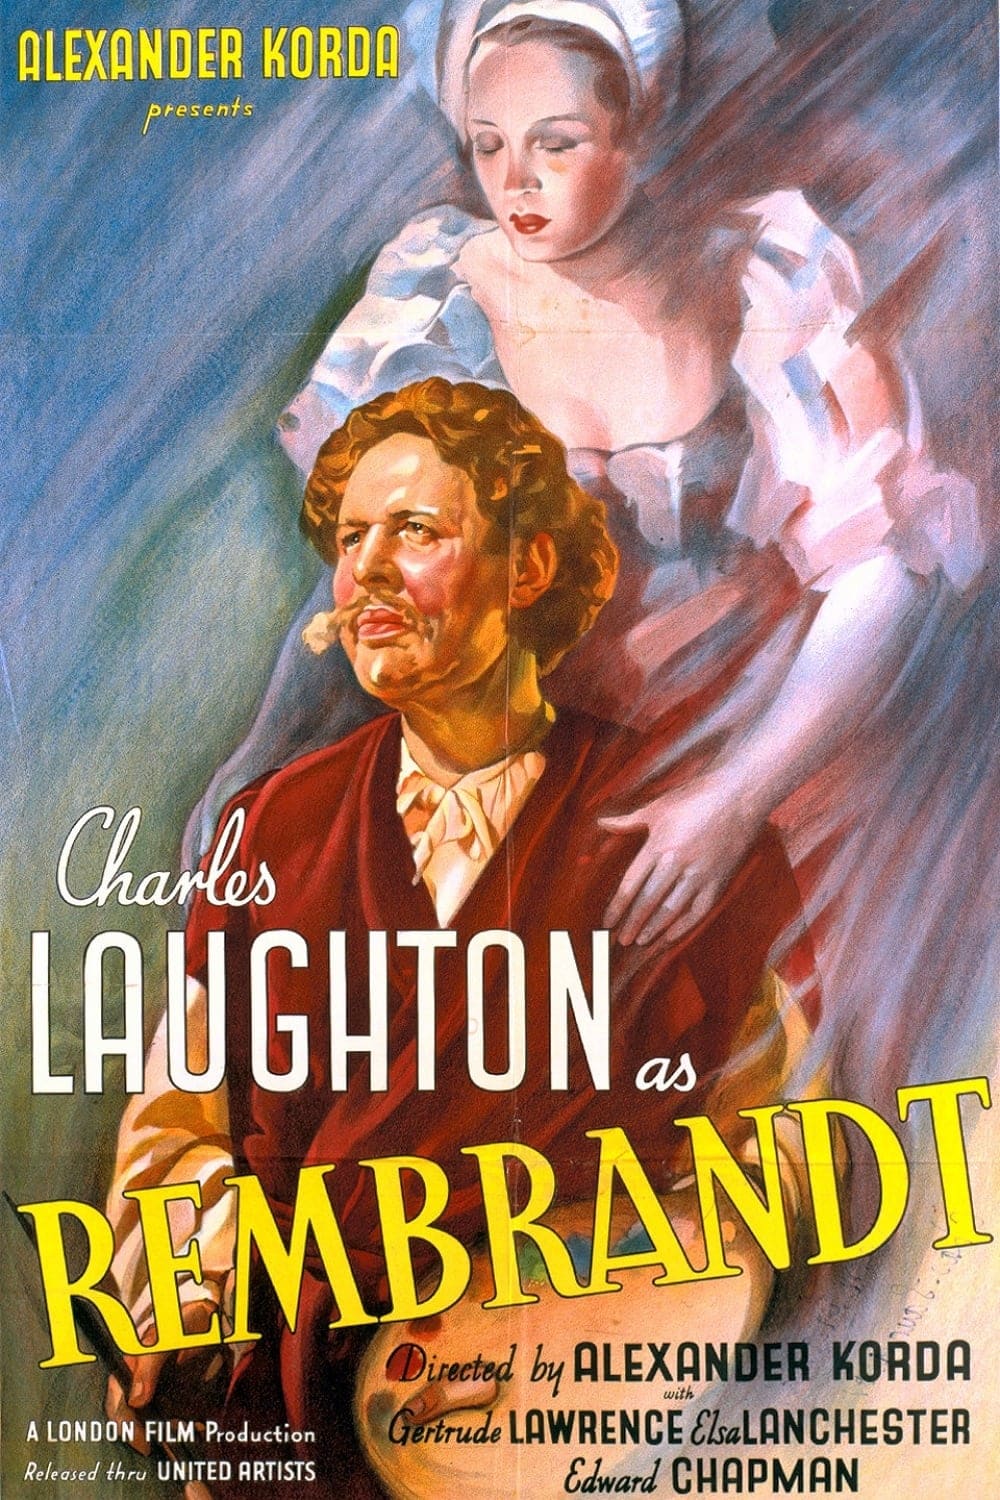 Poster for the movie "Rembrandt"